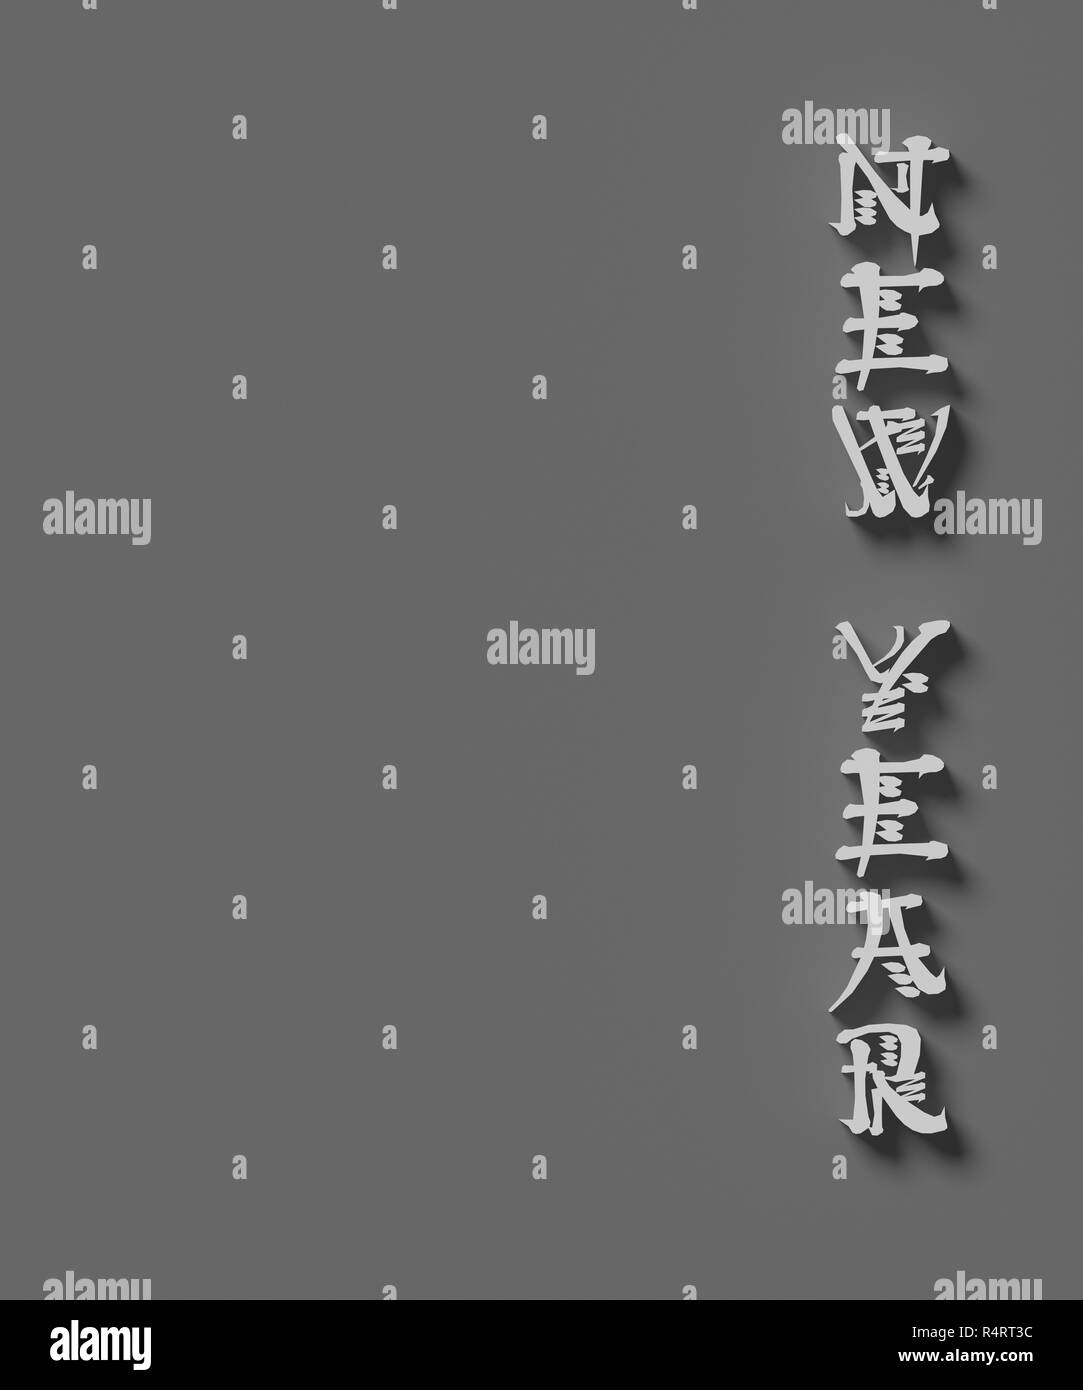 3D RENDERING WORDS 'NEW YEAR' ON PLAIN BACKGROUND Stock Photo